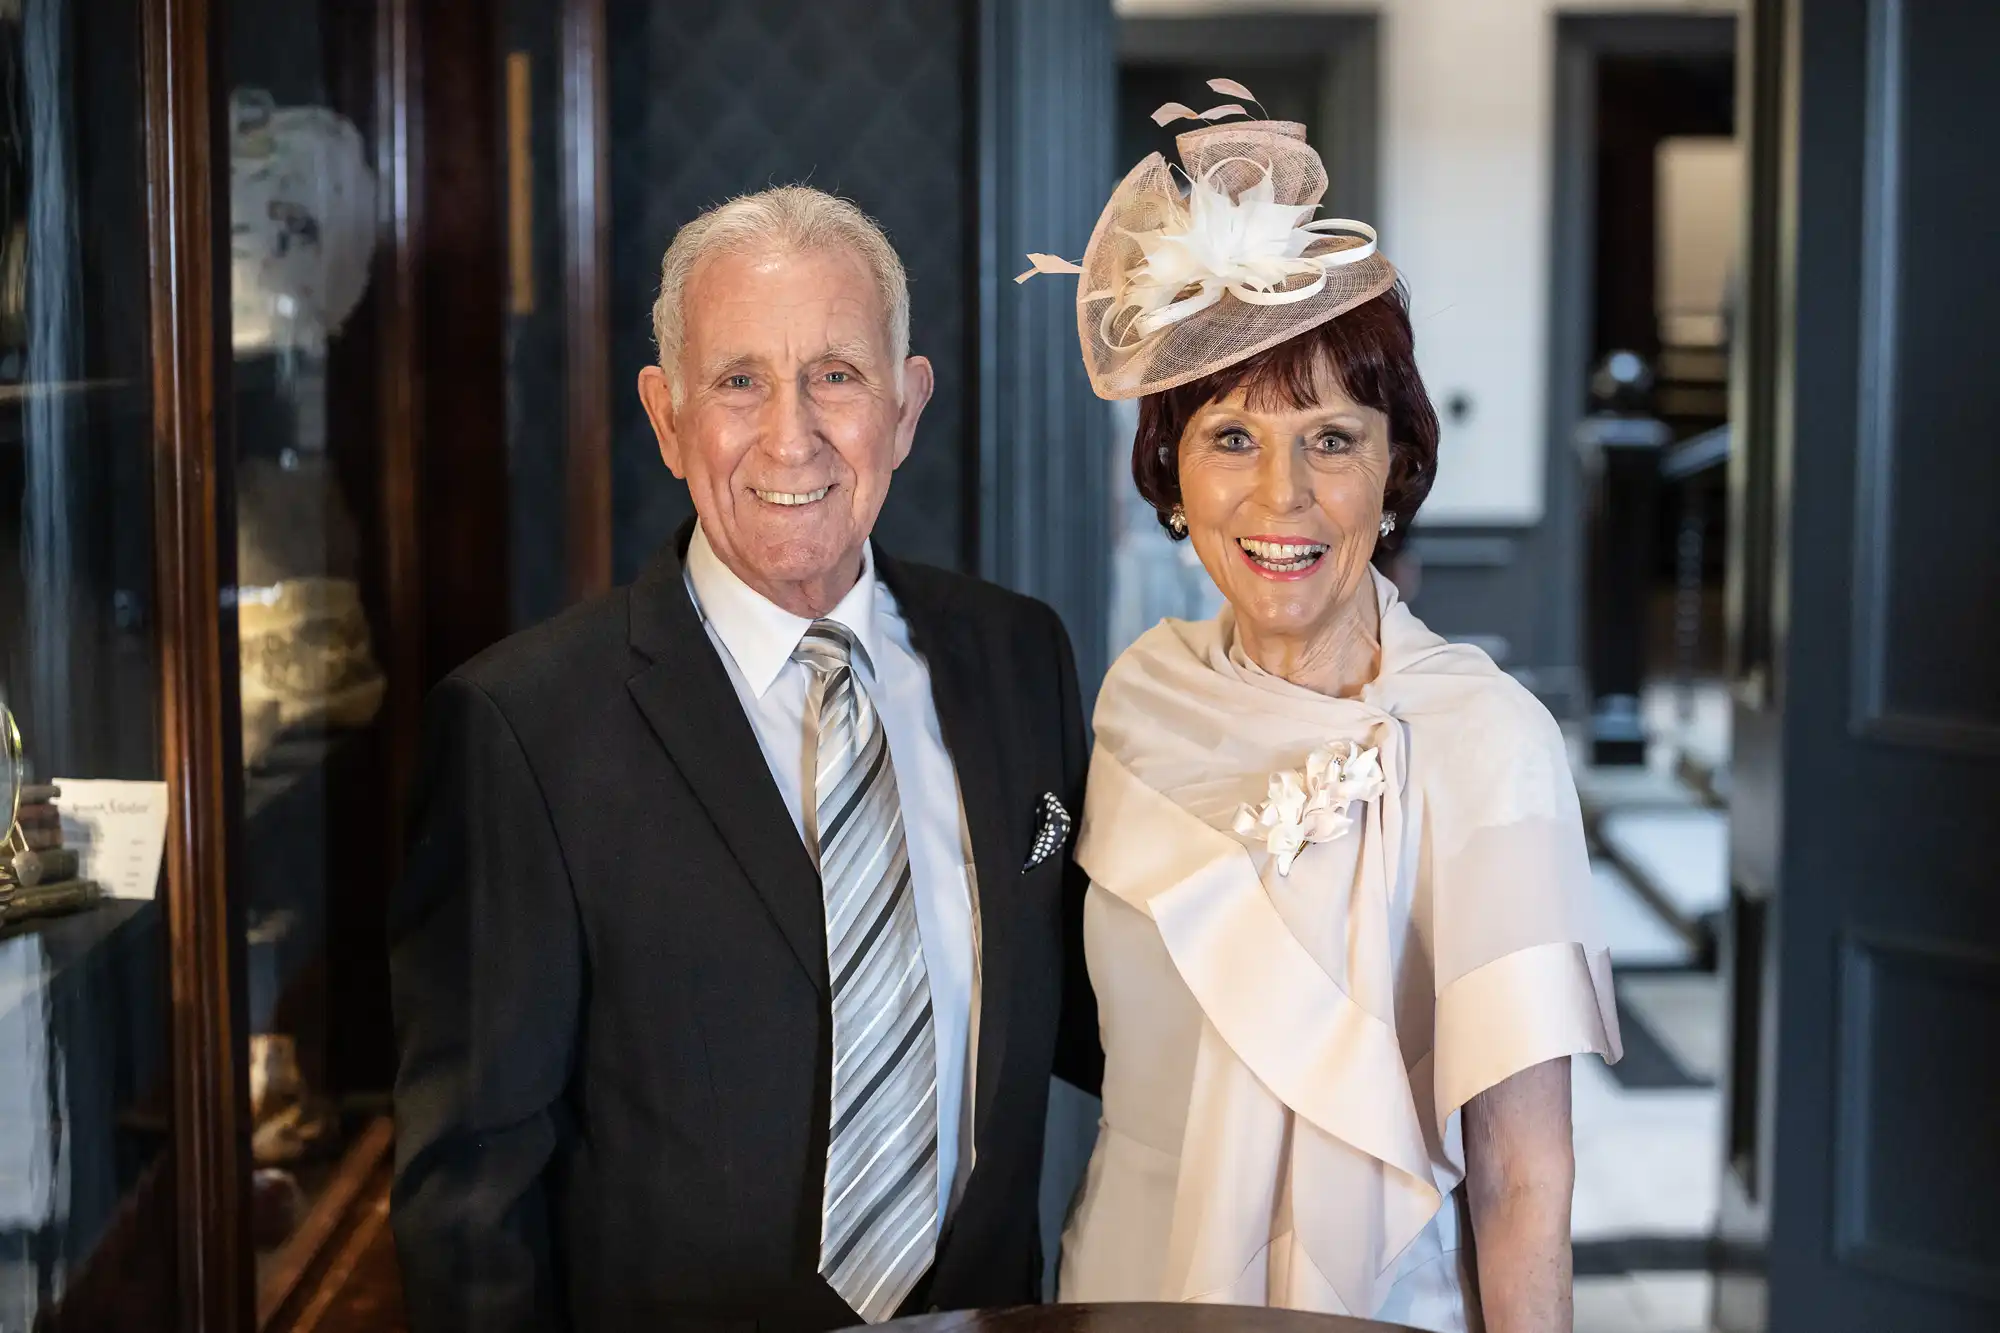 An elderly man in a suit with a striped tie and a smiling woman dressed in a light-colored formal outfit and hat standing indoors.